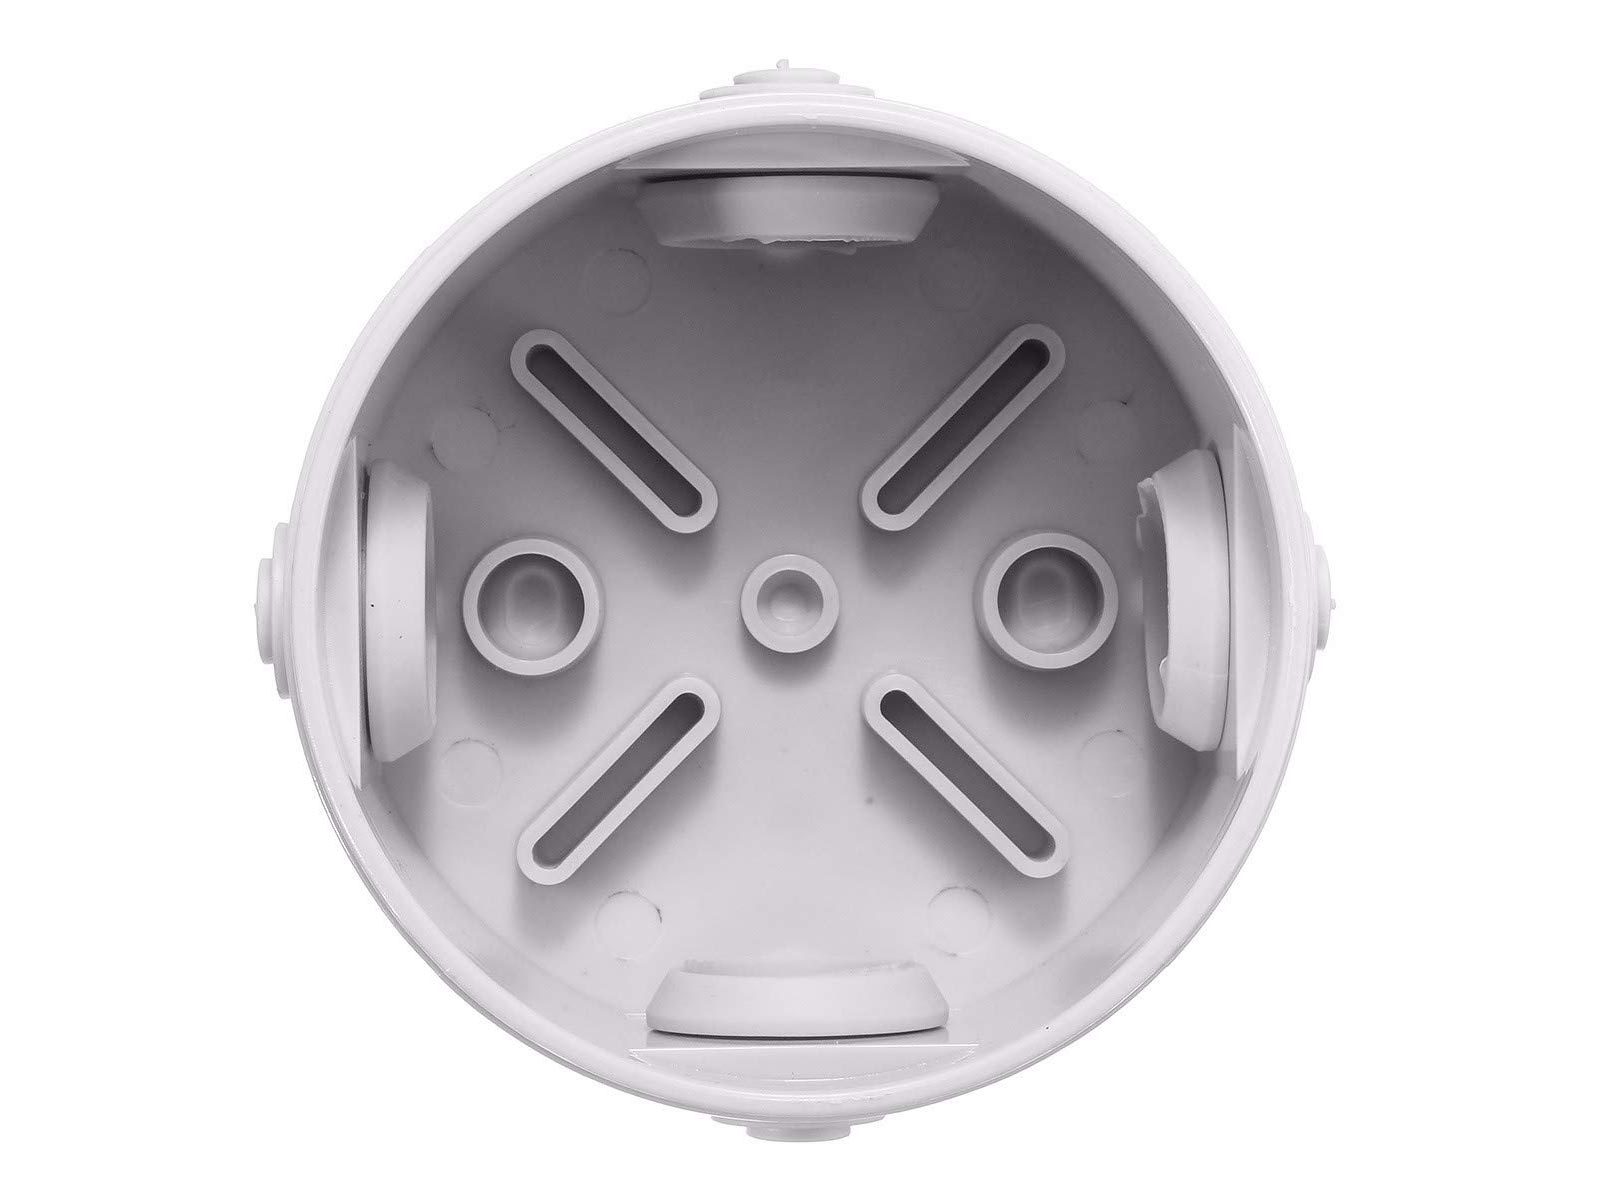 ESR R080 80mm x 35mm IP44 Round Electrical Junction Box with Rubber Cable Entry Grommets Snap-on Lid Splashproof Weatherproof CCTV Cable Connection